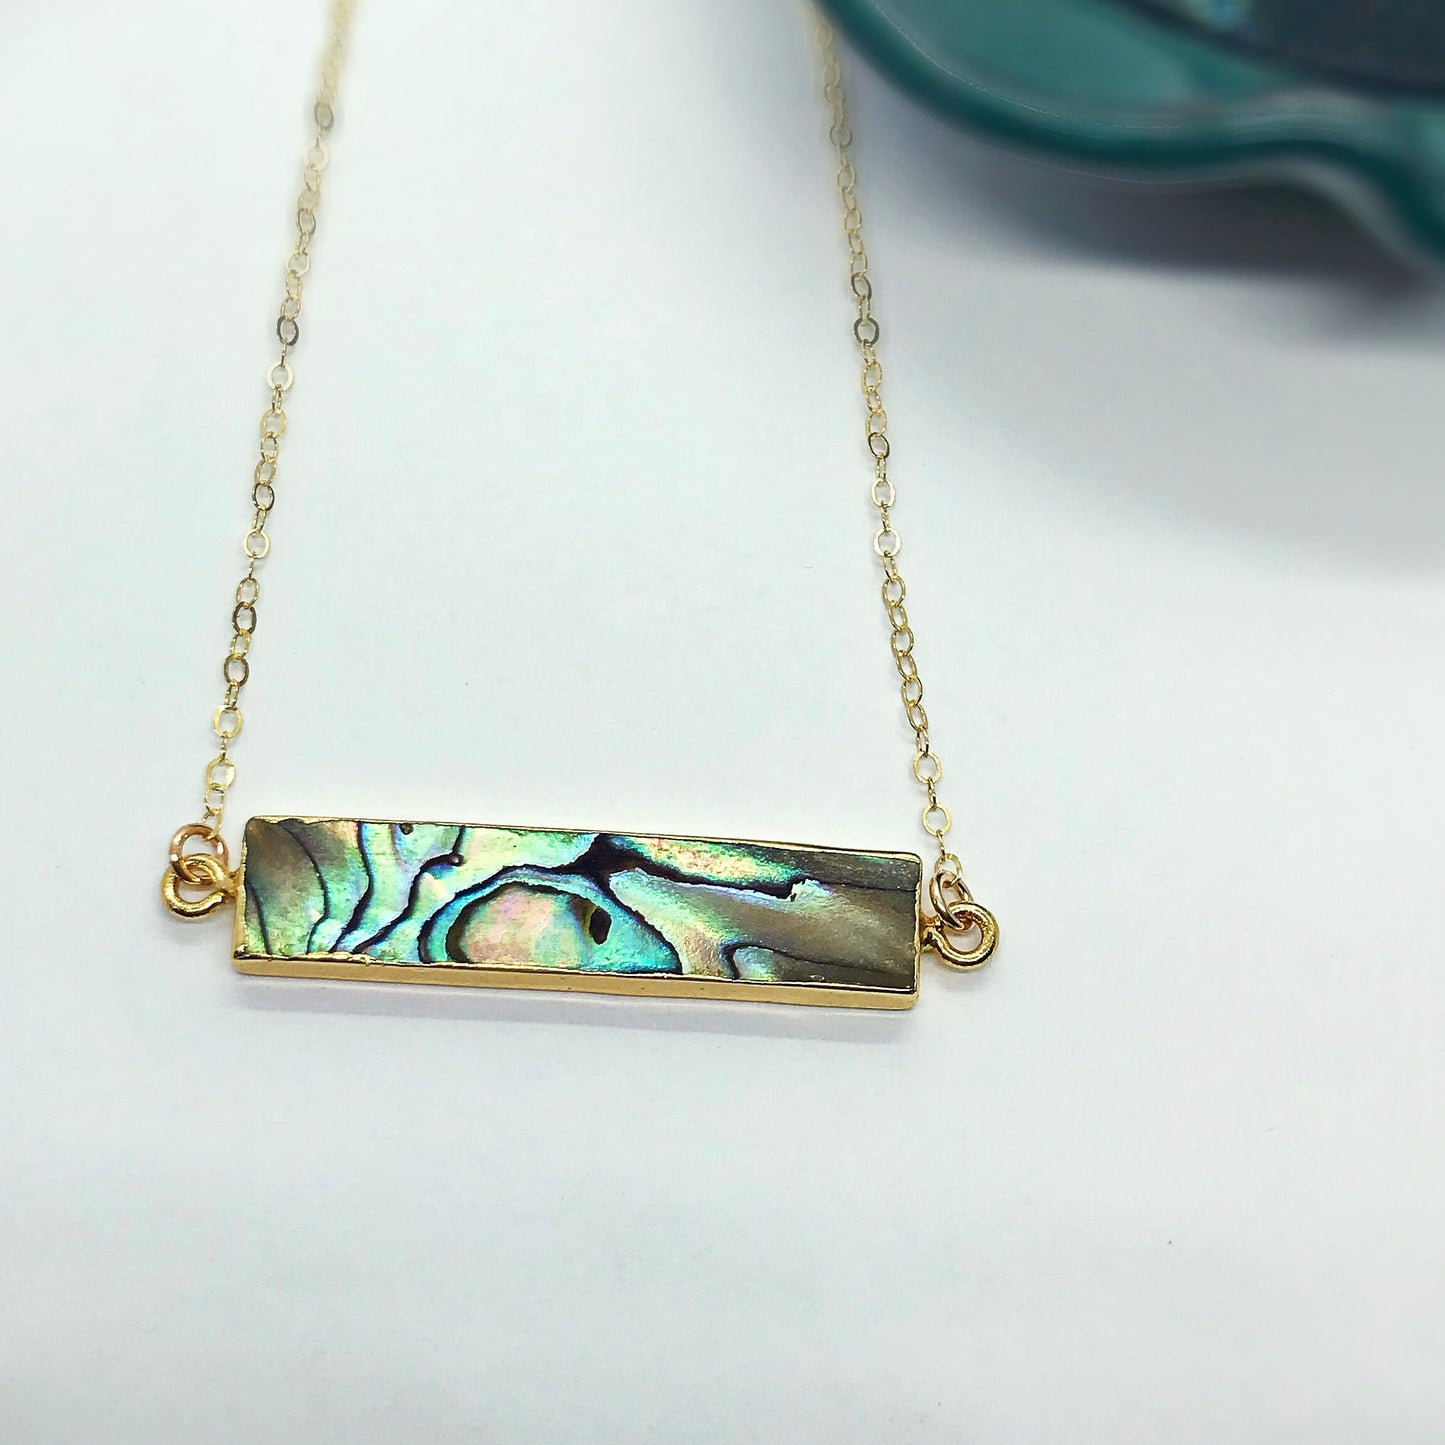 Abalone Bar Necklace - Blue Sky Feathers